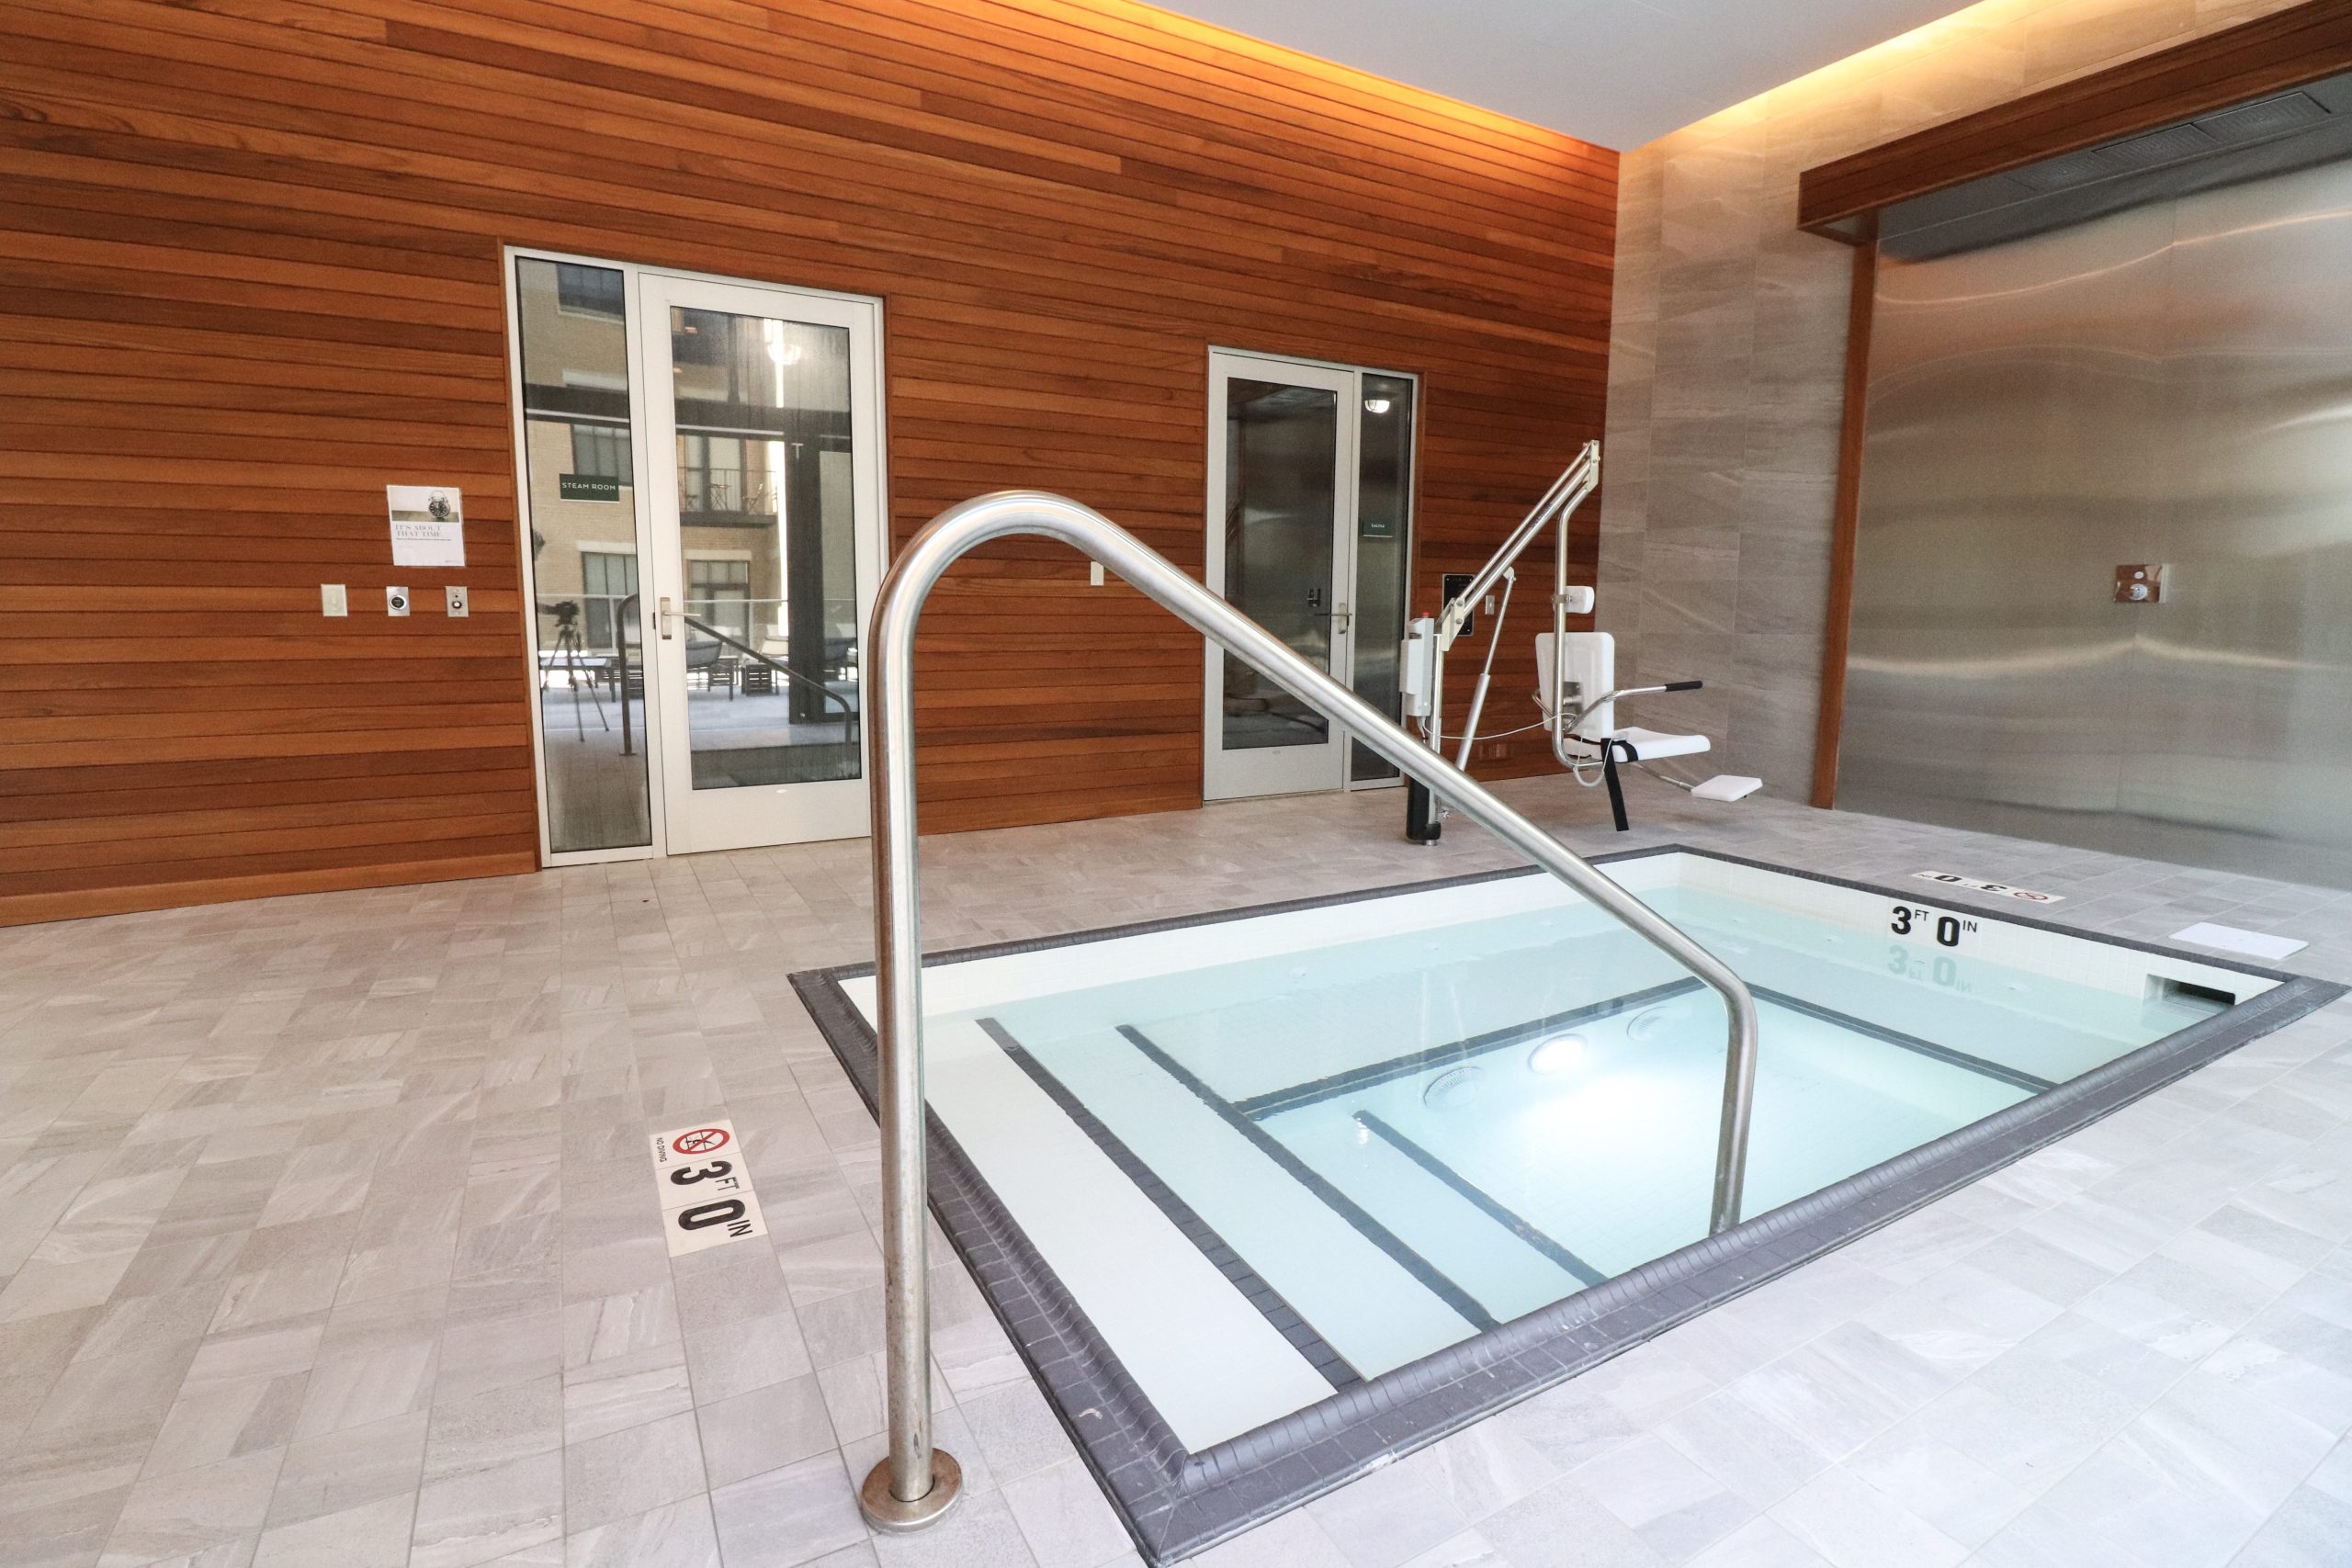 The spa at The Paragon apartments in downtown Chicago